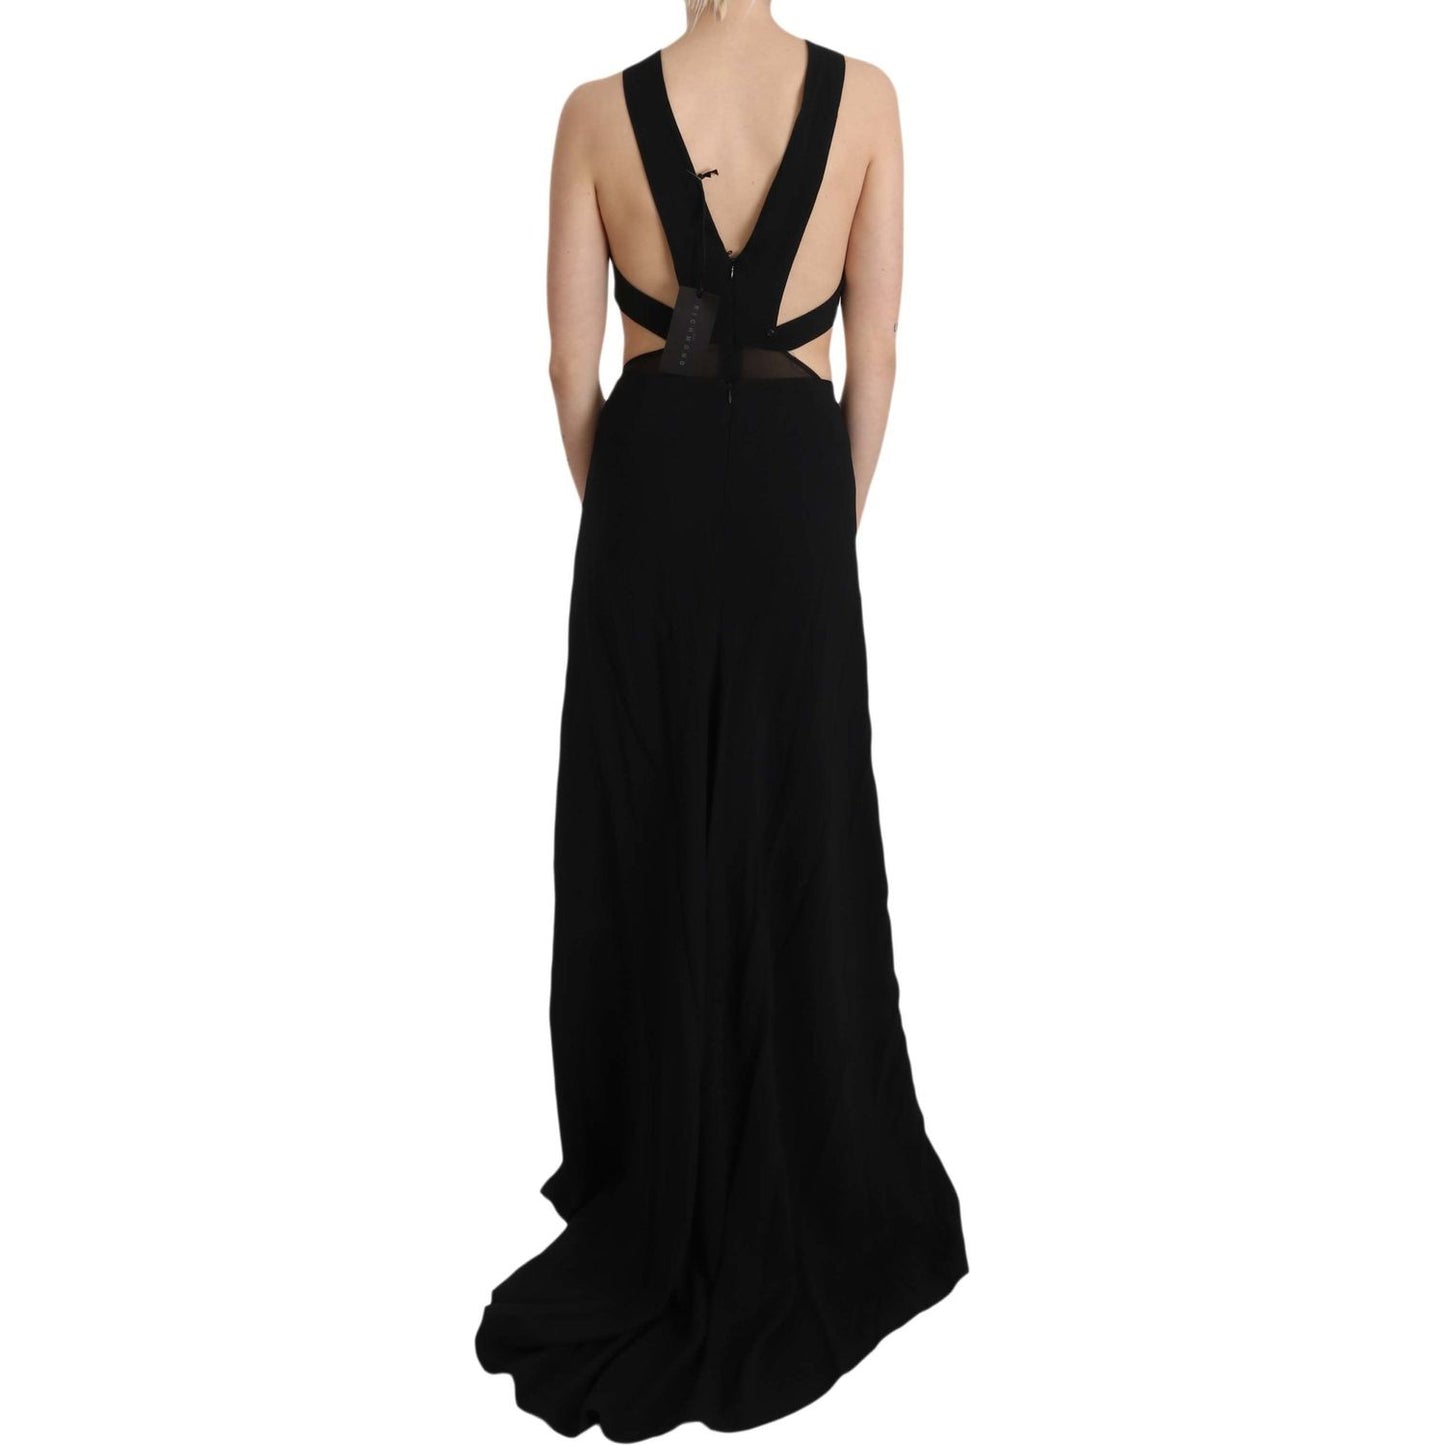 John Richmond Elegant Flare Maxi Evening Dress with Crystal Accents Dresses black-crystal-leather-gown-flare-dress IMG_1487-scaled-2c0739aa-d58.jpg